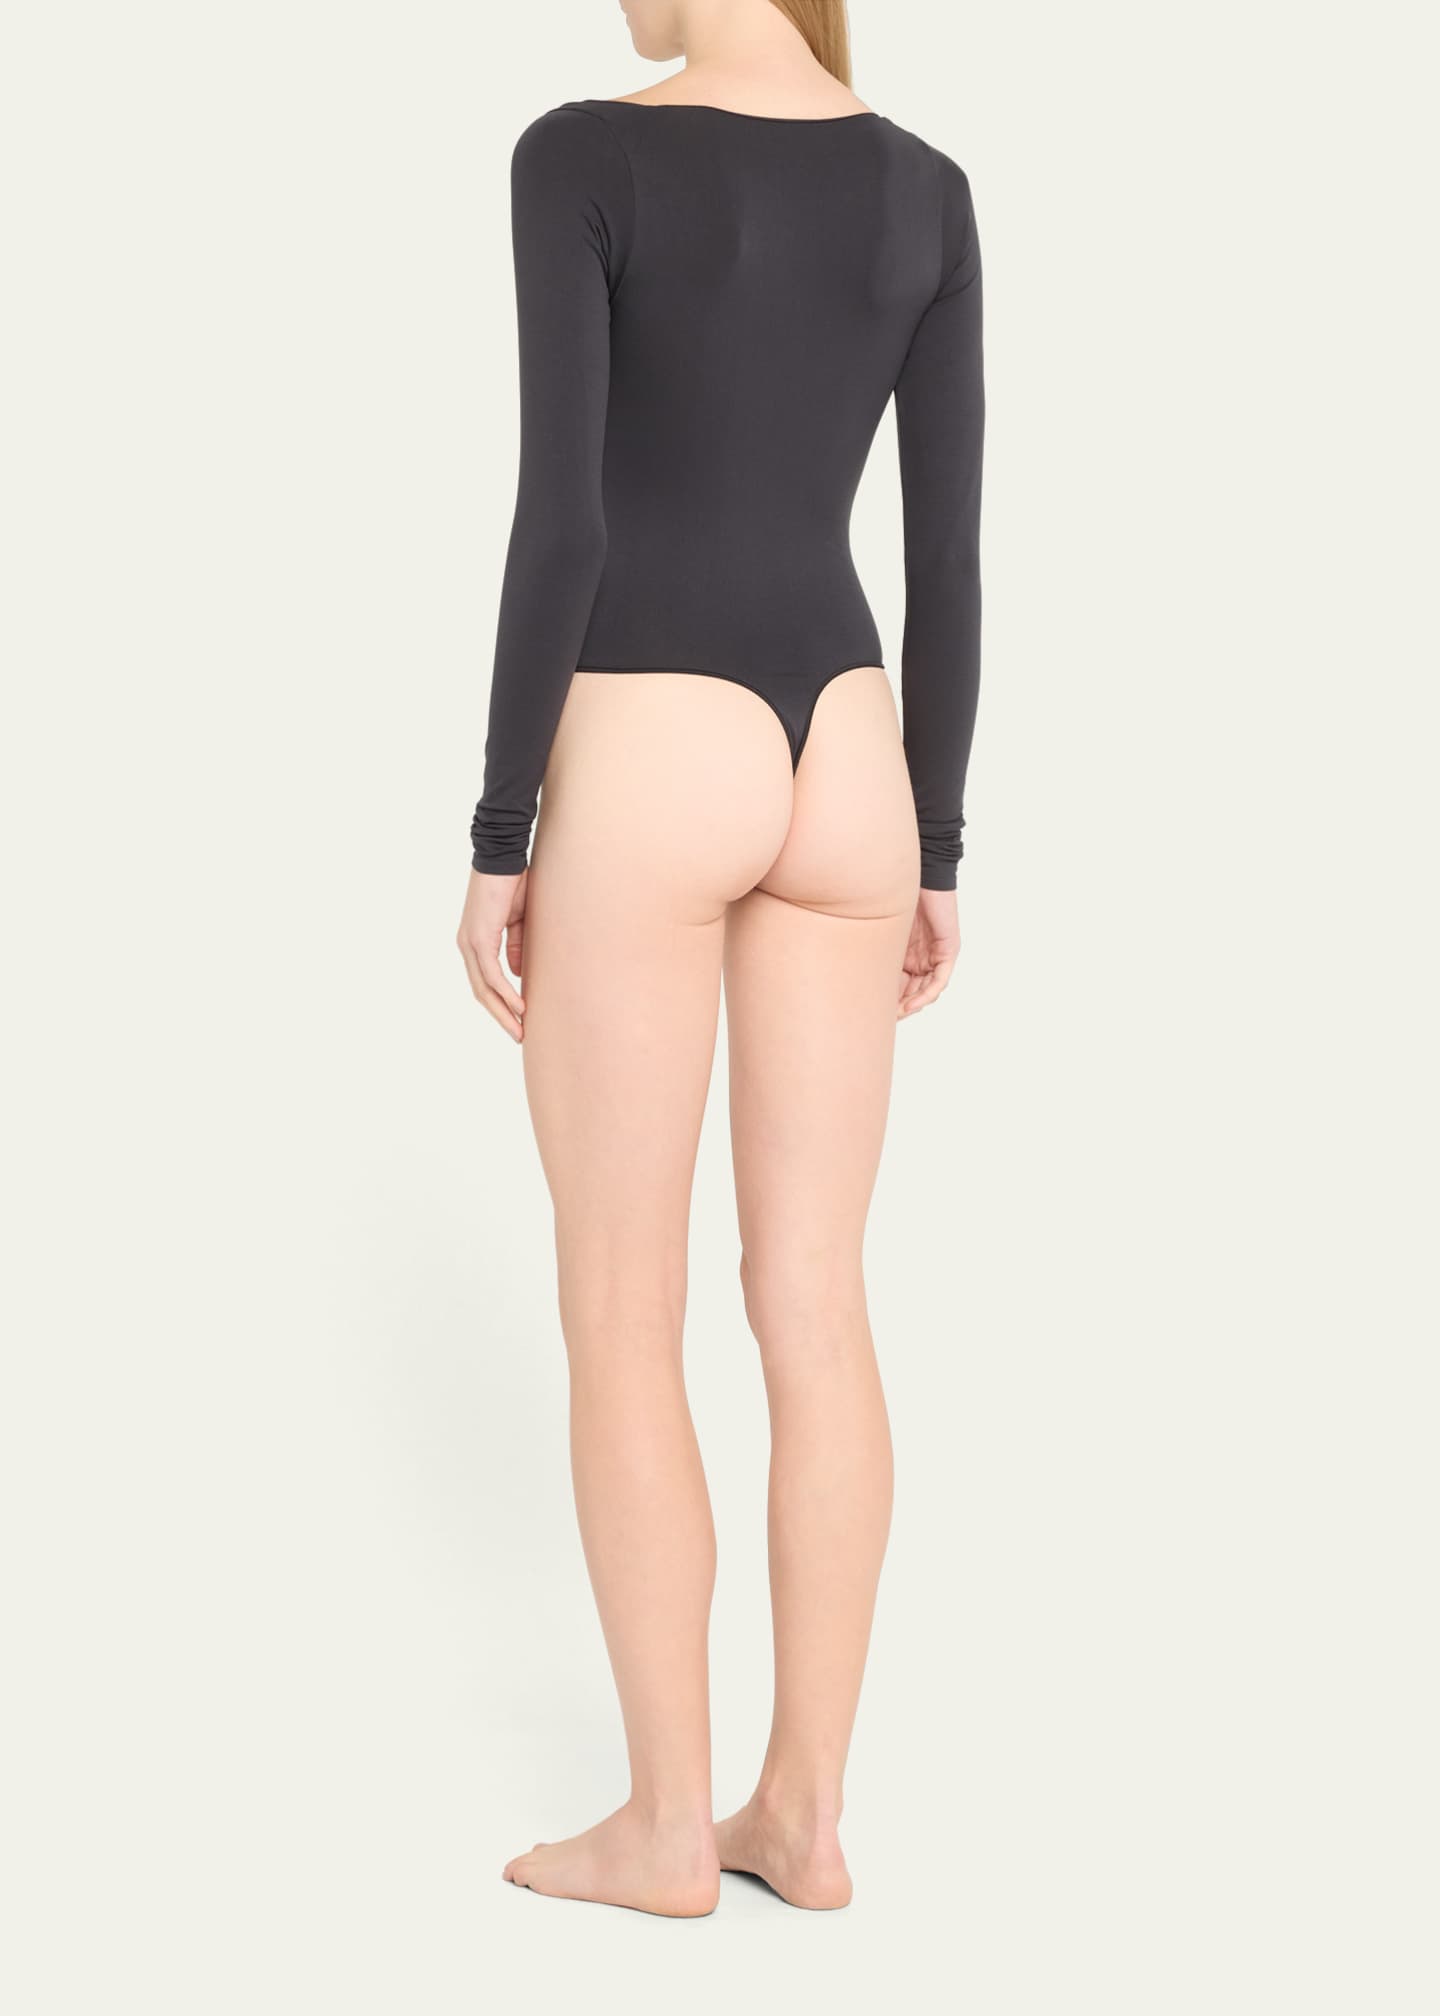 SKIMS on X: Now Available: SKIMS Essential Bodysuits in 2 new